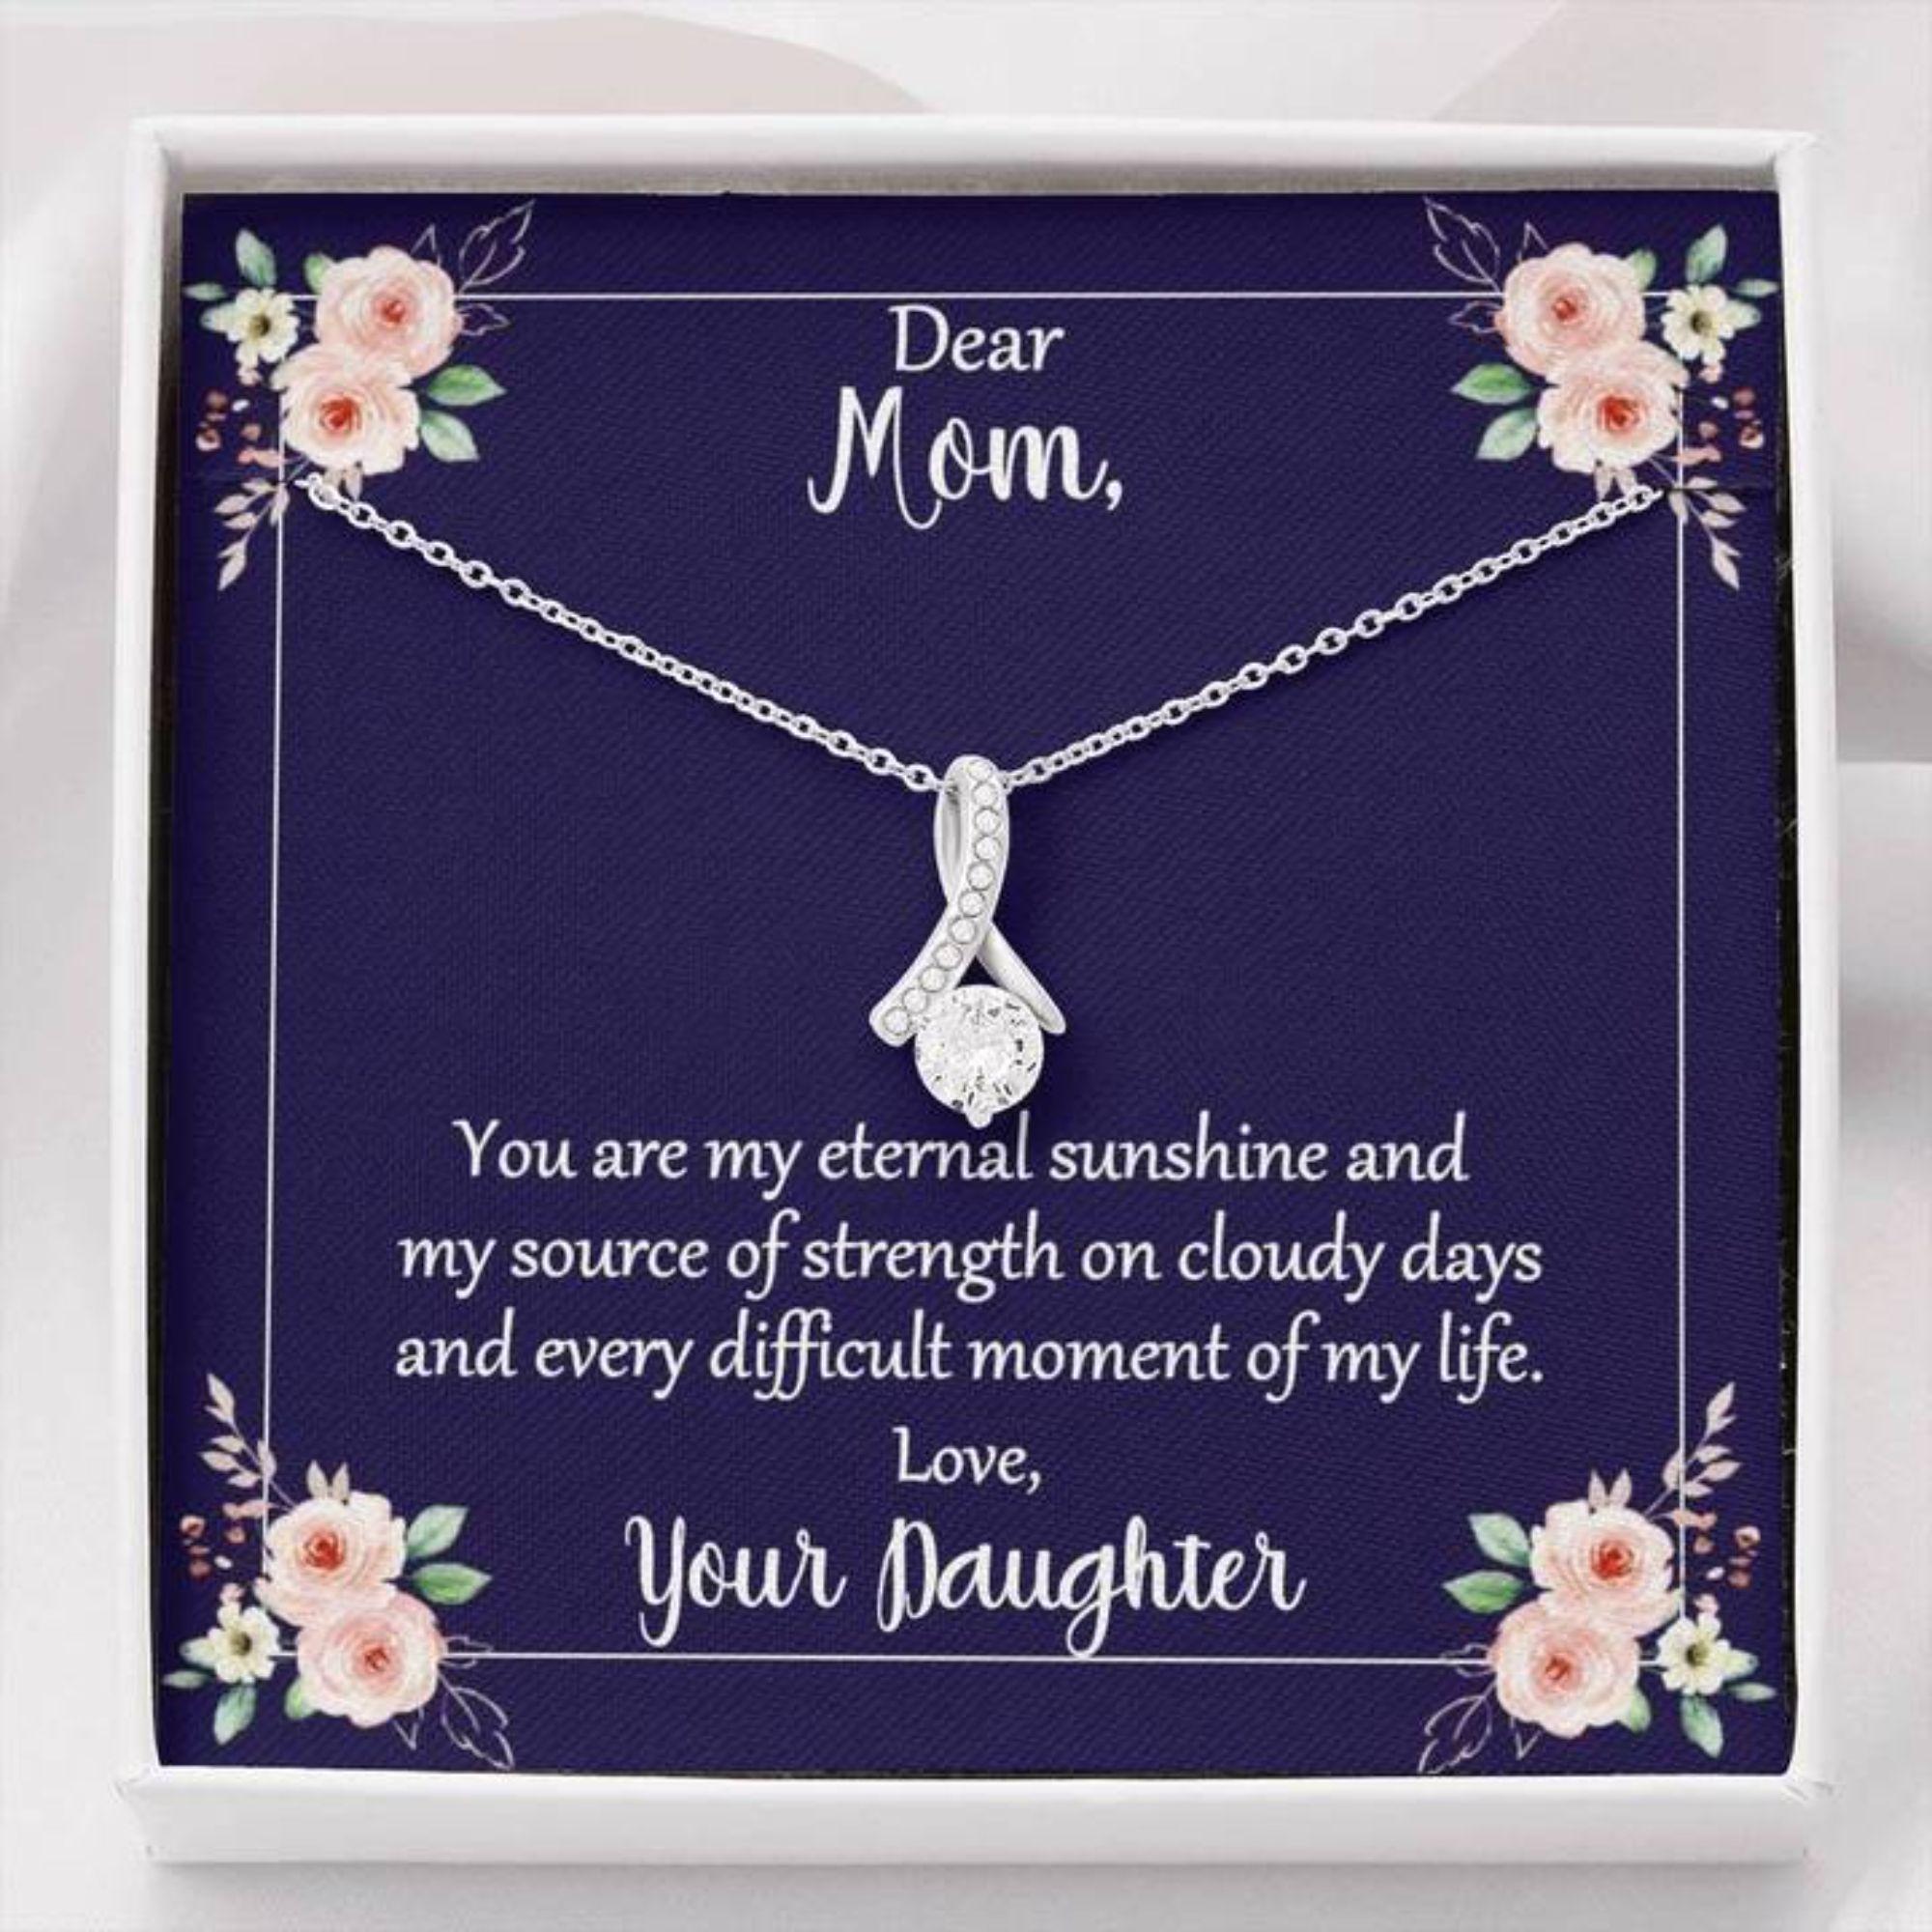 Mom Necklace, Mom You Are My Eternal Sunshine With Necklace